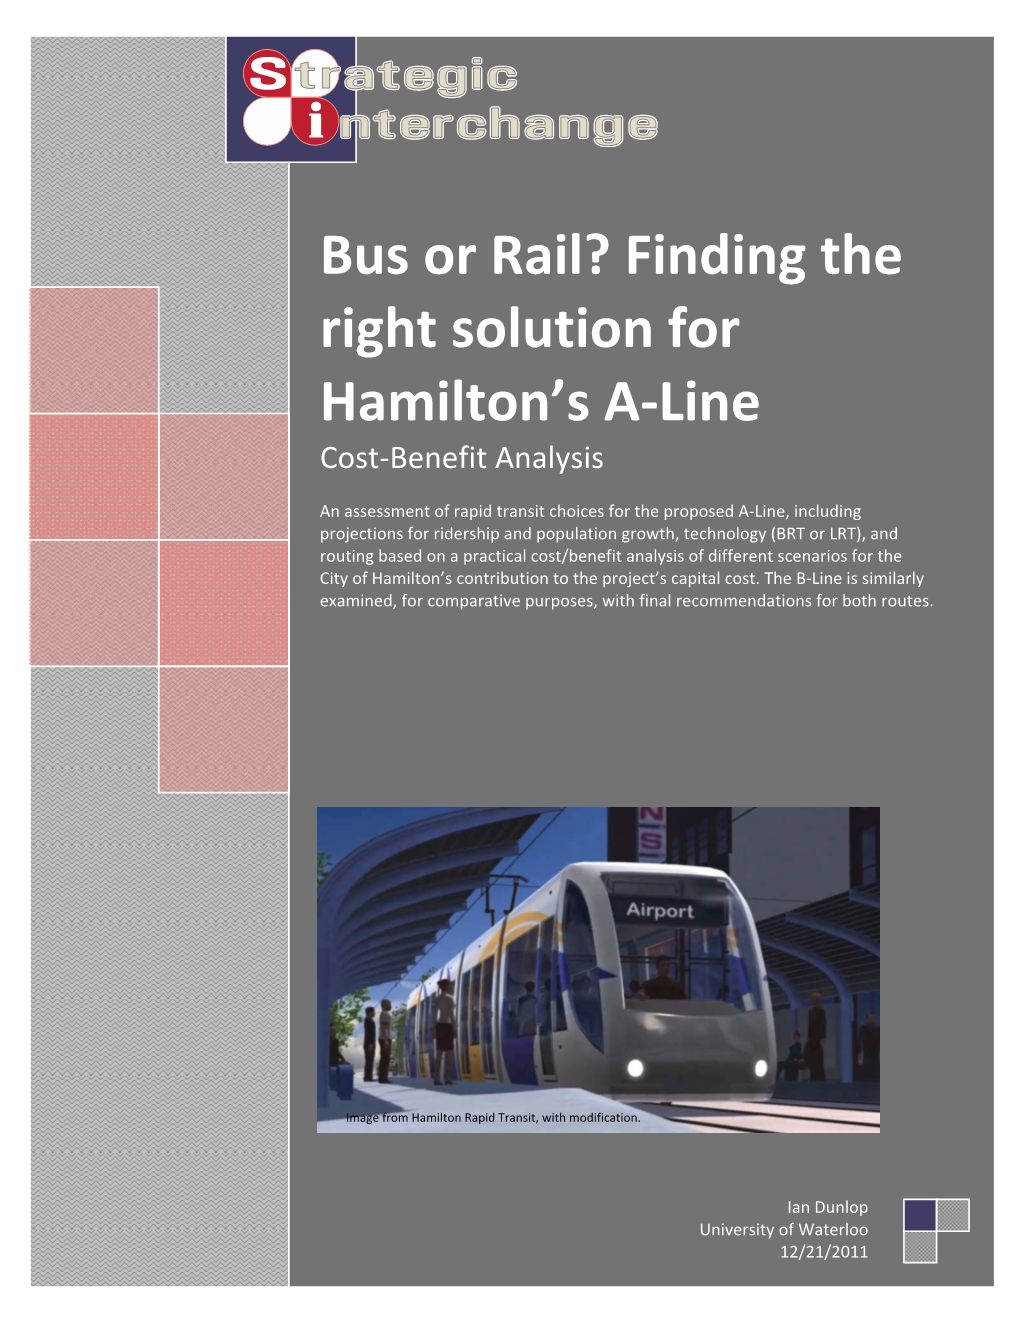 Bus Or Rail? Finding the Right Solution for Hamilton's A-Line